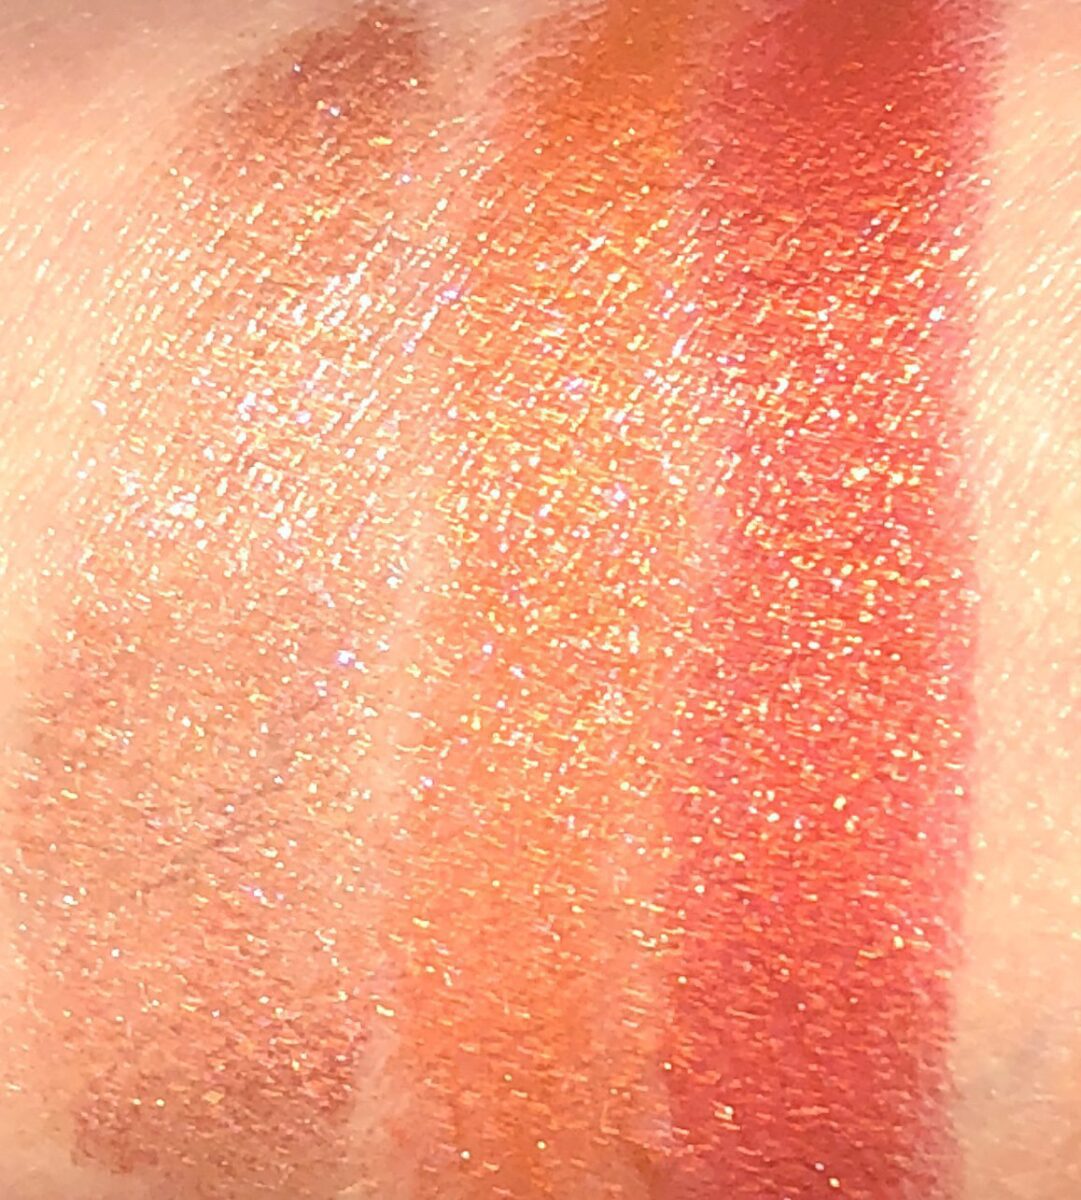 SWATCHES LEFT-THRUST, MIDDLE, FIRESTAR, AND CLASH